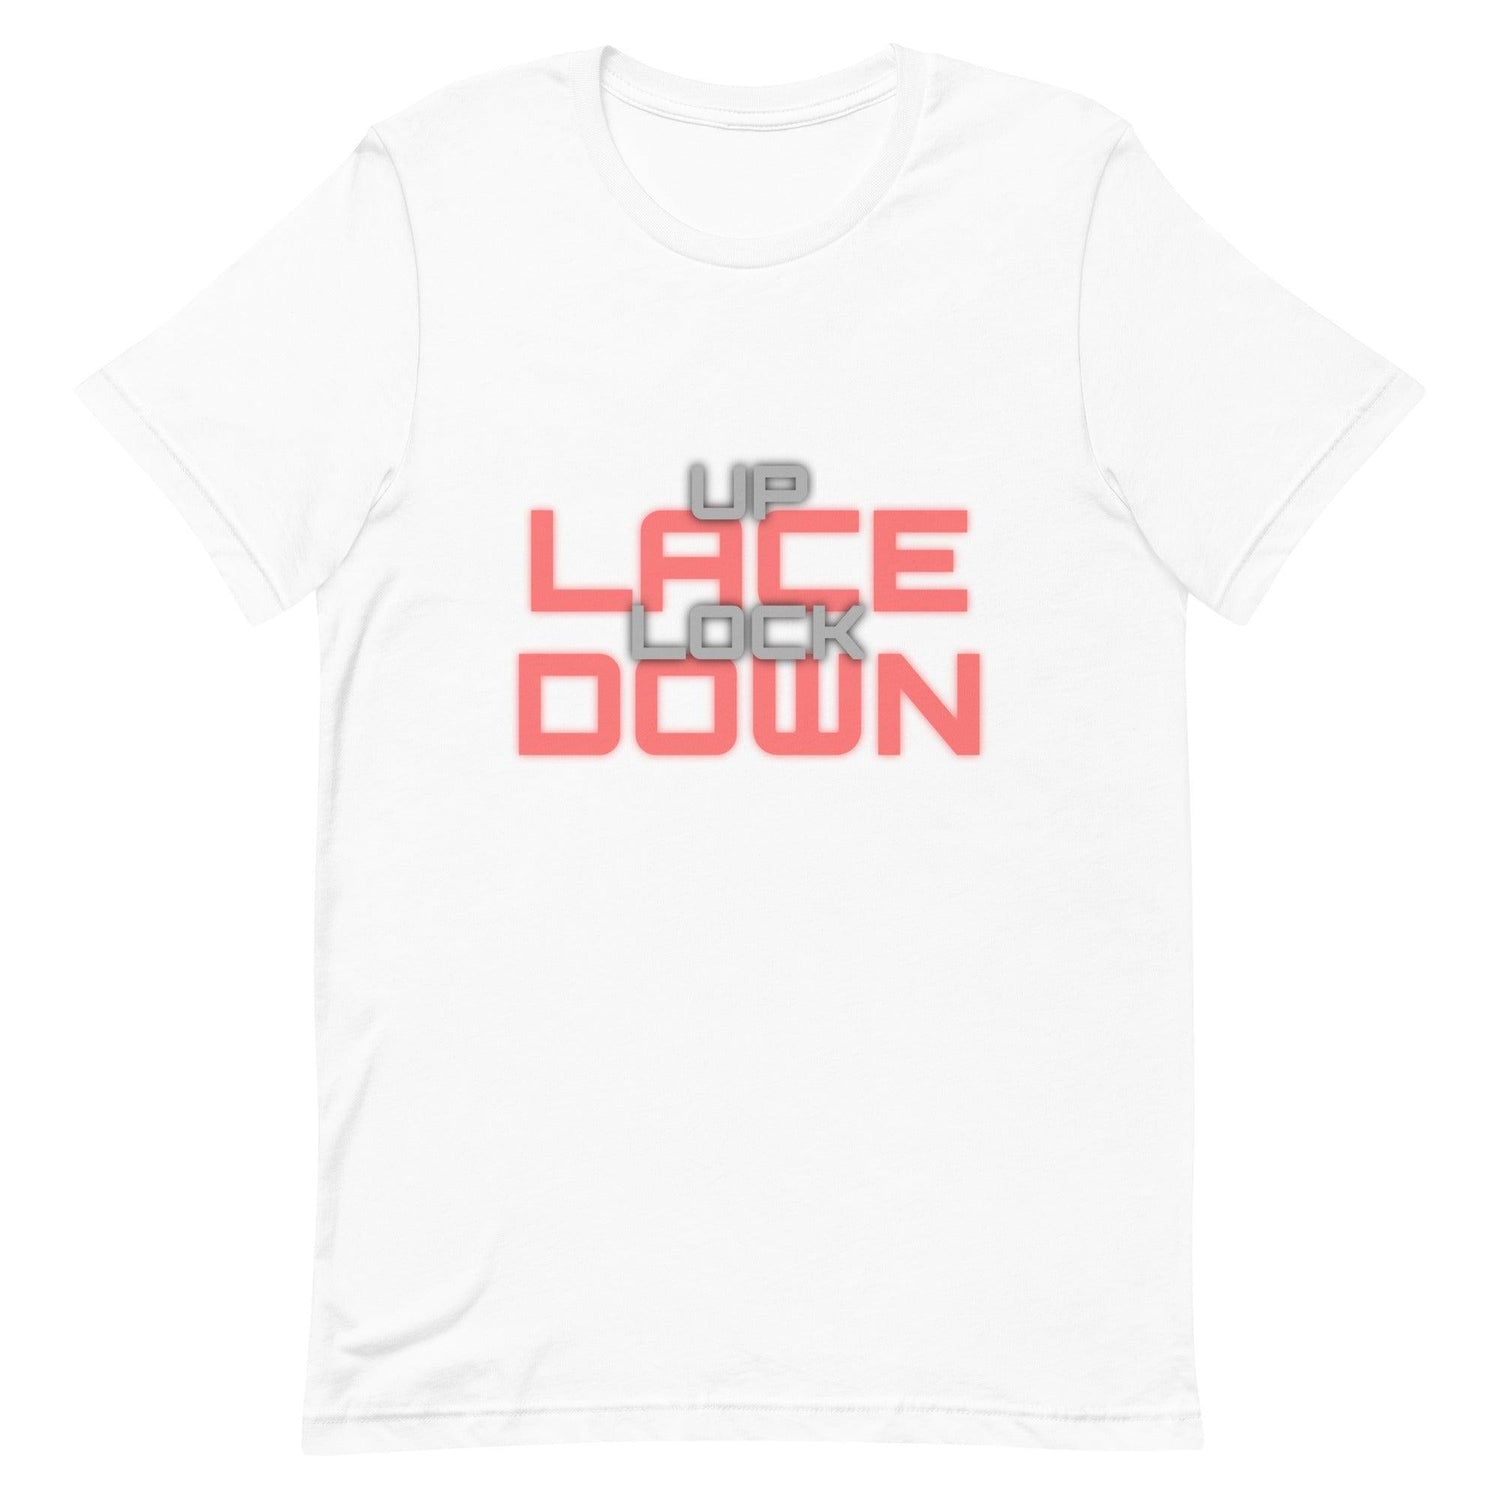 Angelo Sharpless "Lace Up Lock Down" t-shirt - Fan Arch